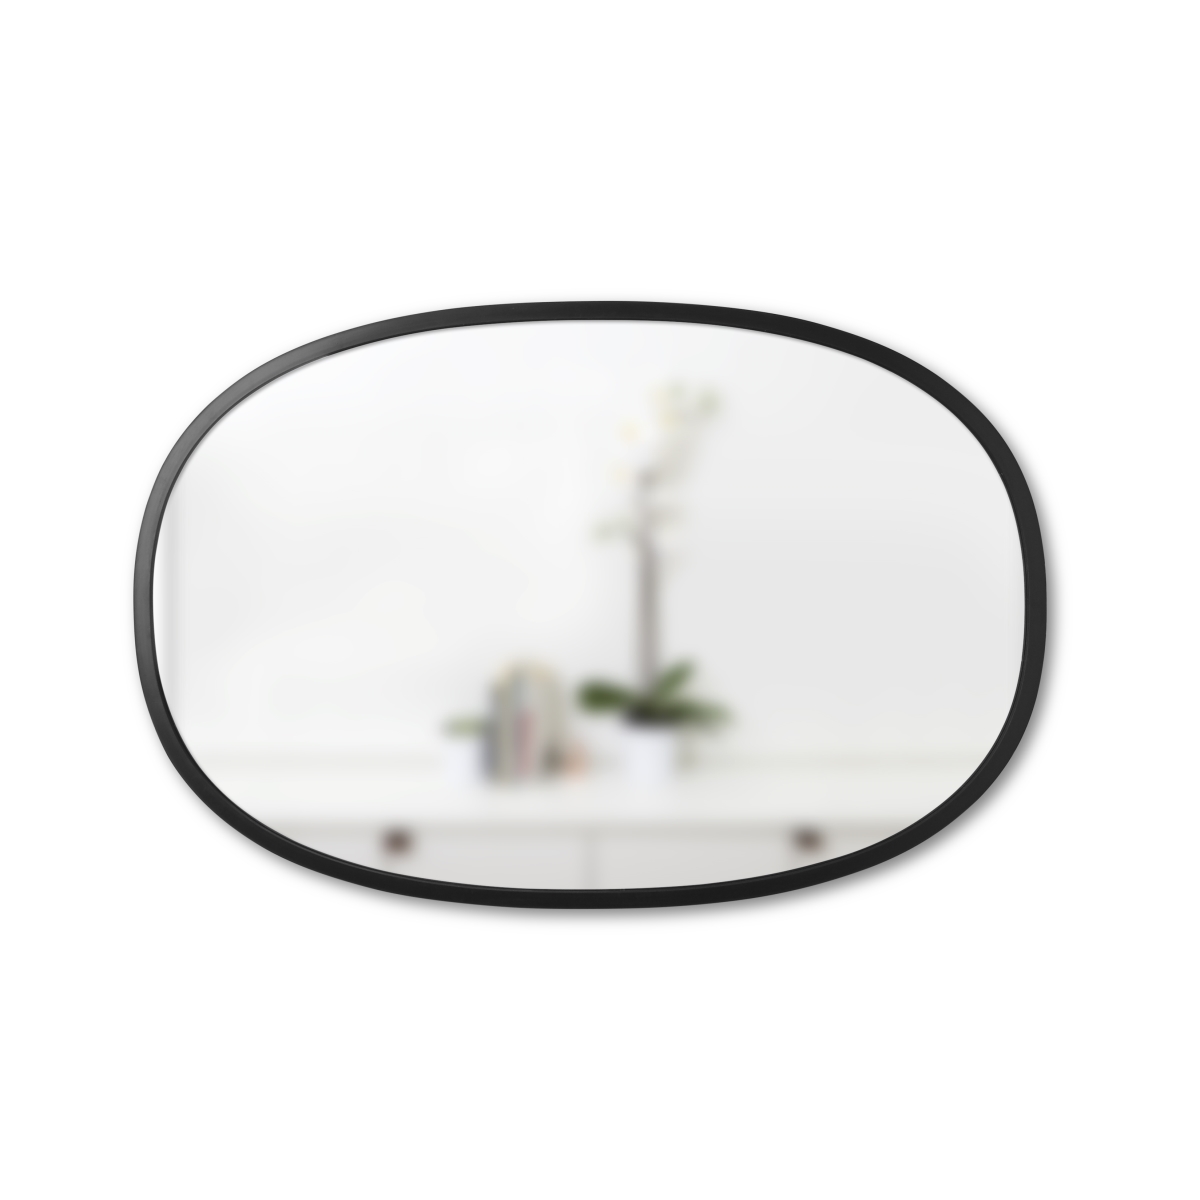 Picture of Umbra 1006044-040 Hub Oval Mirror, 24 x 36 in. - Black